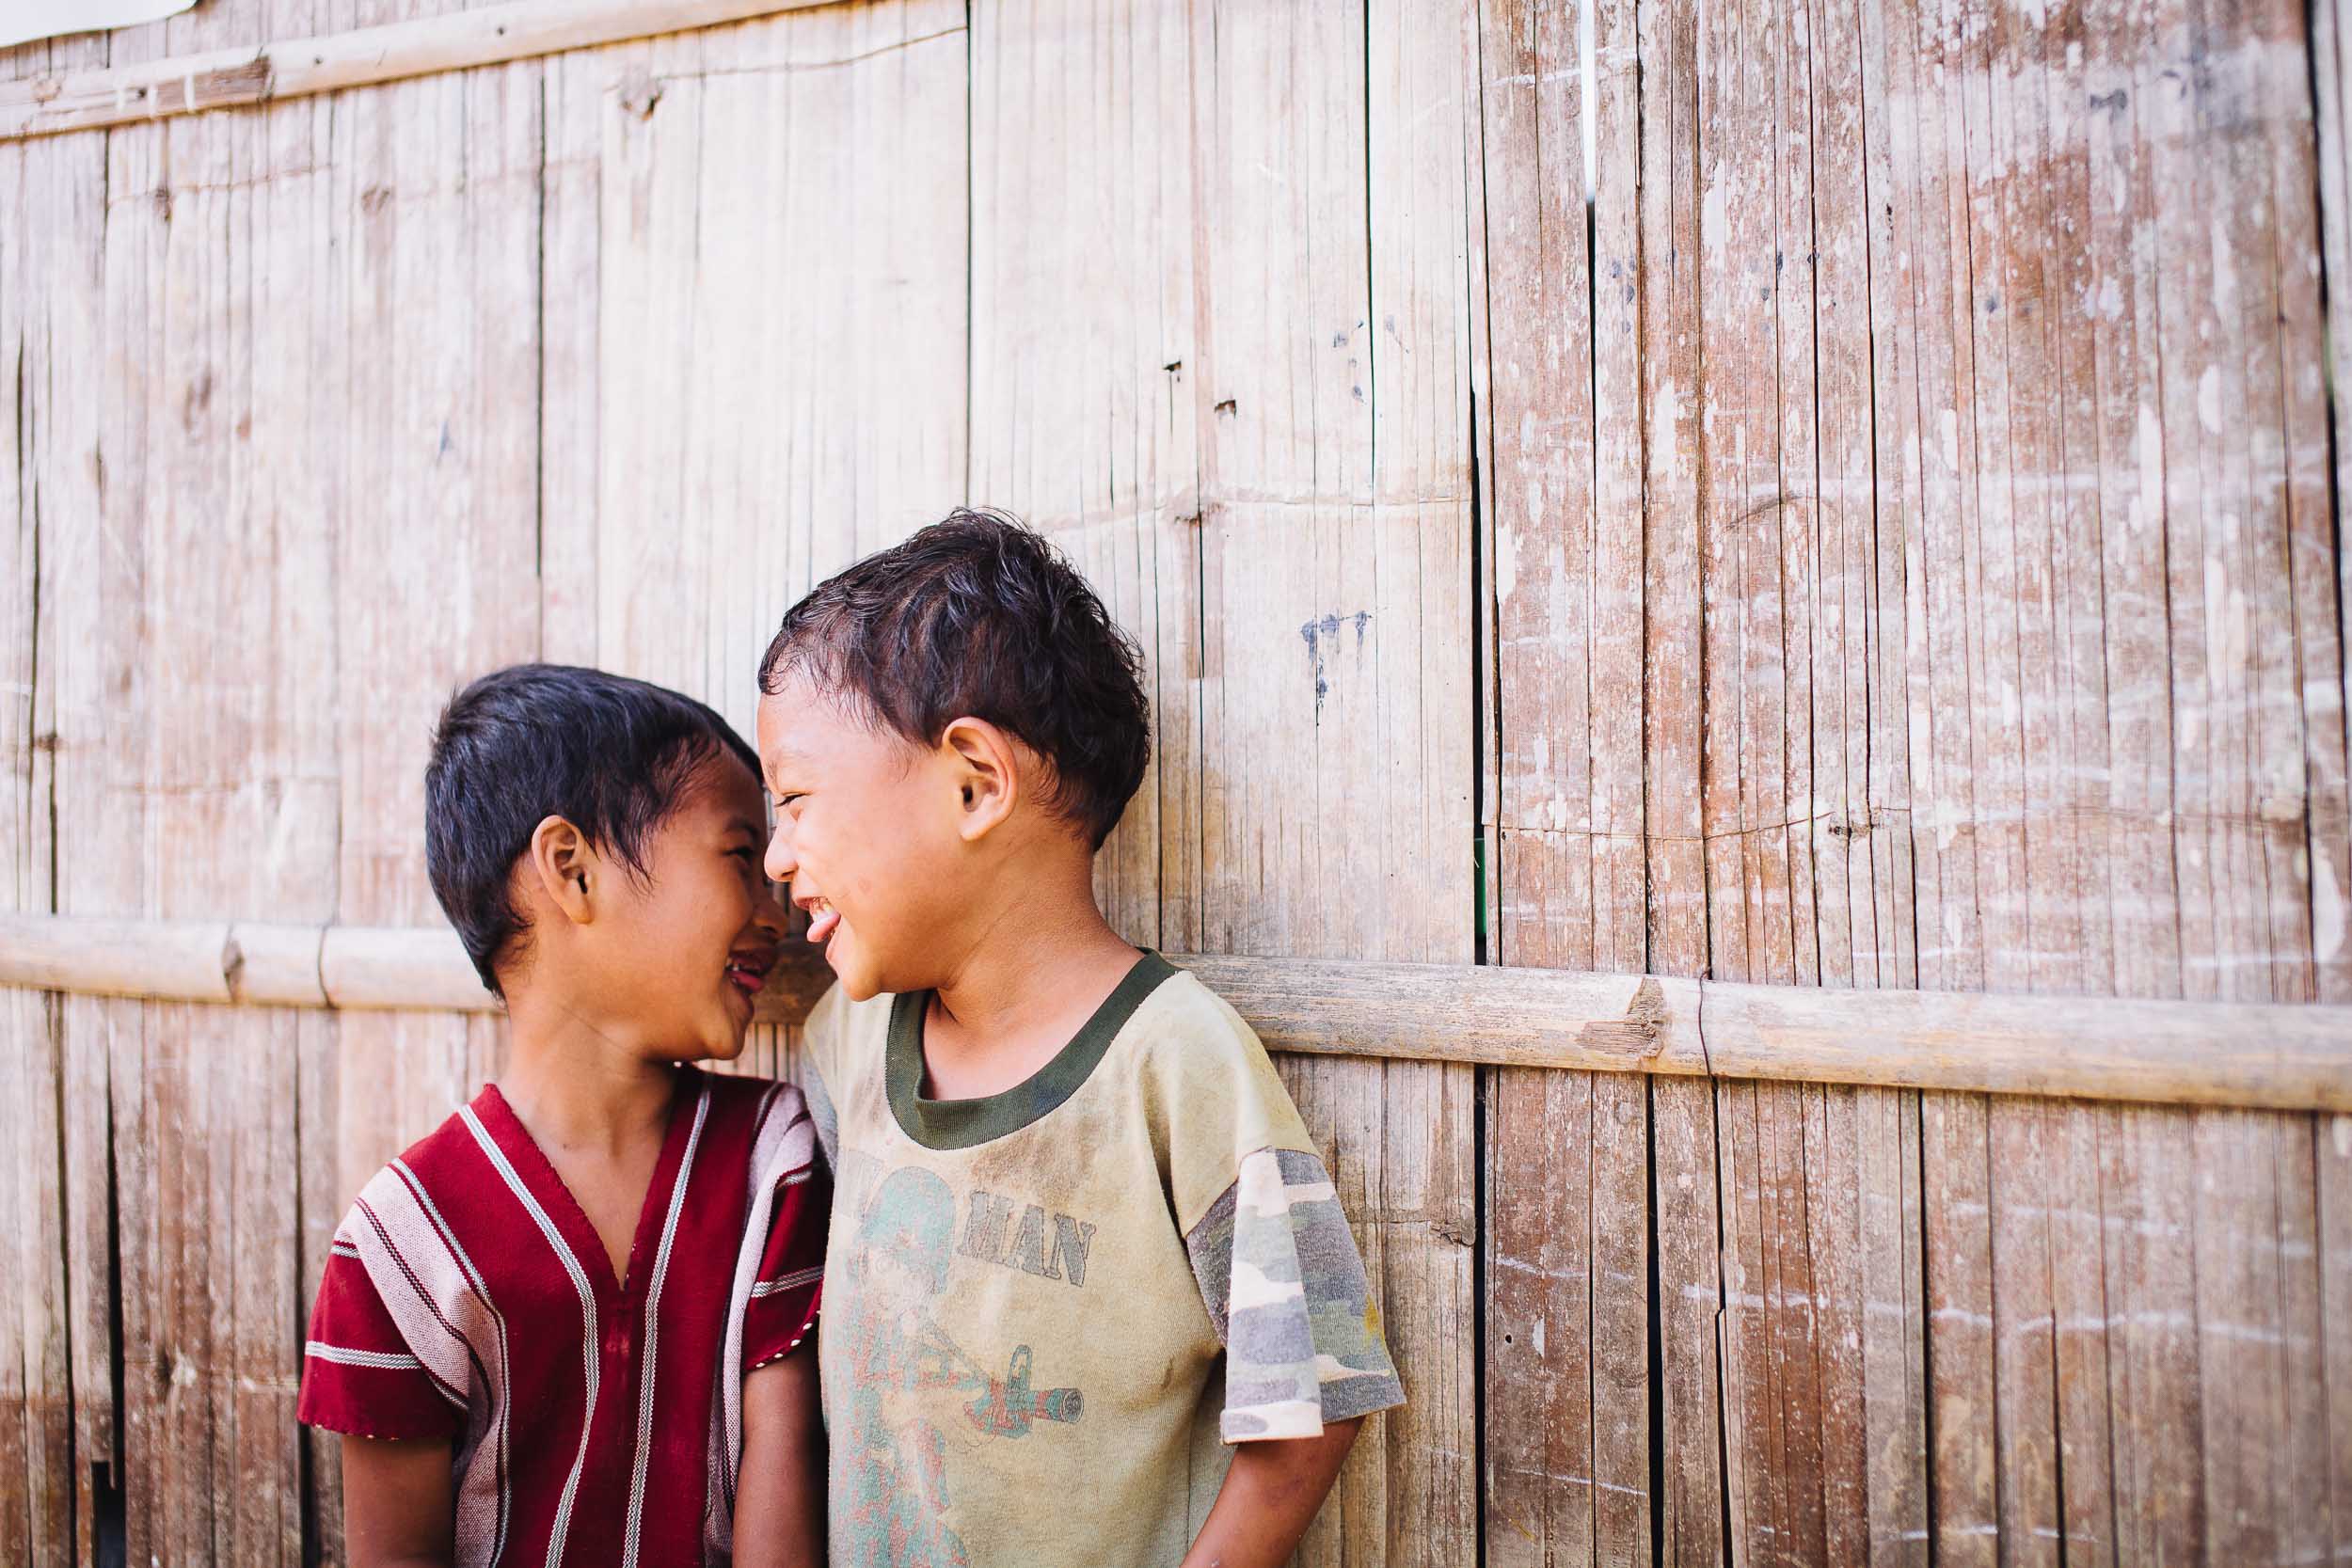 Best friends laughing | Story of the photo | Thailand